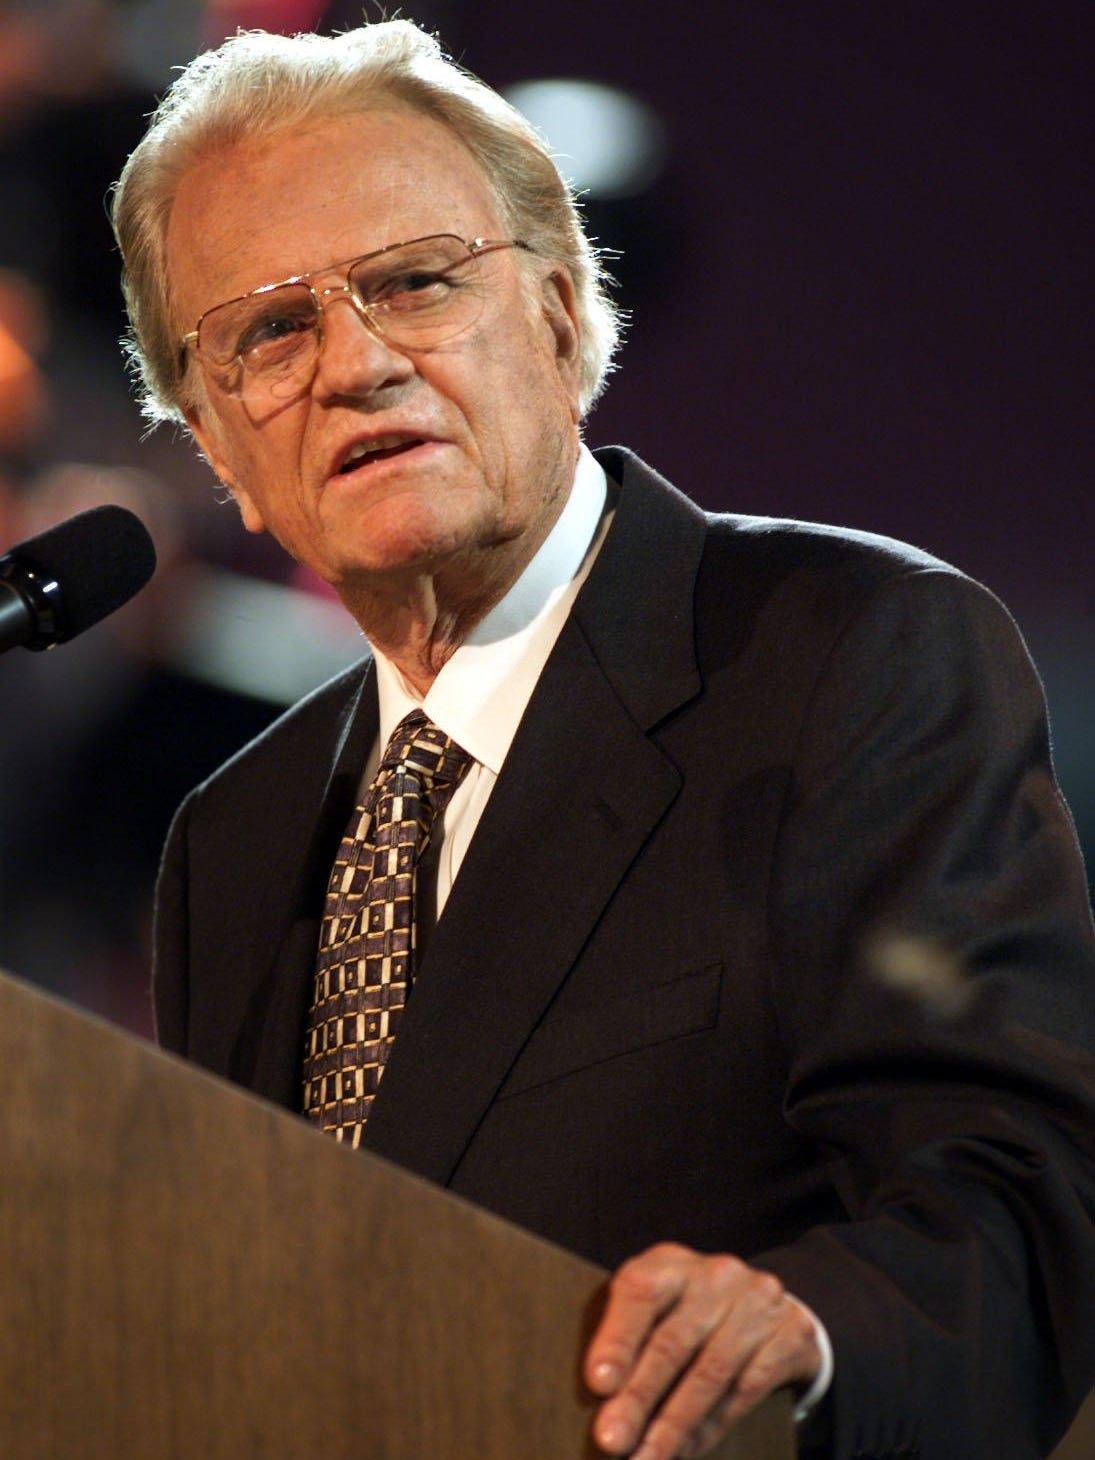 DOWNLOAD MP3: FINDING GOD'S WILL YOUR LIFE By Billy Graham (sermon) 4